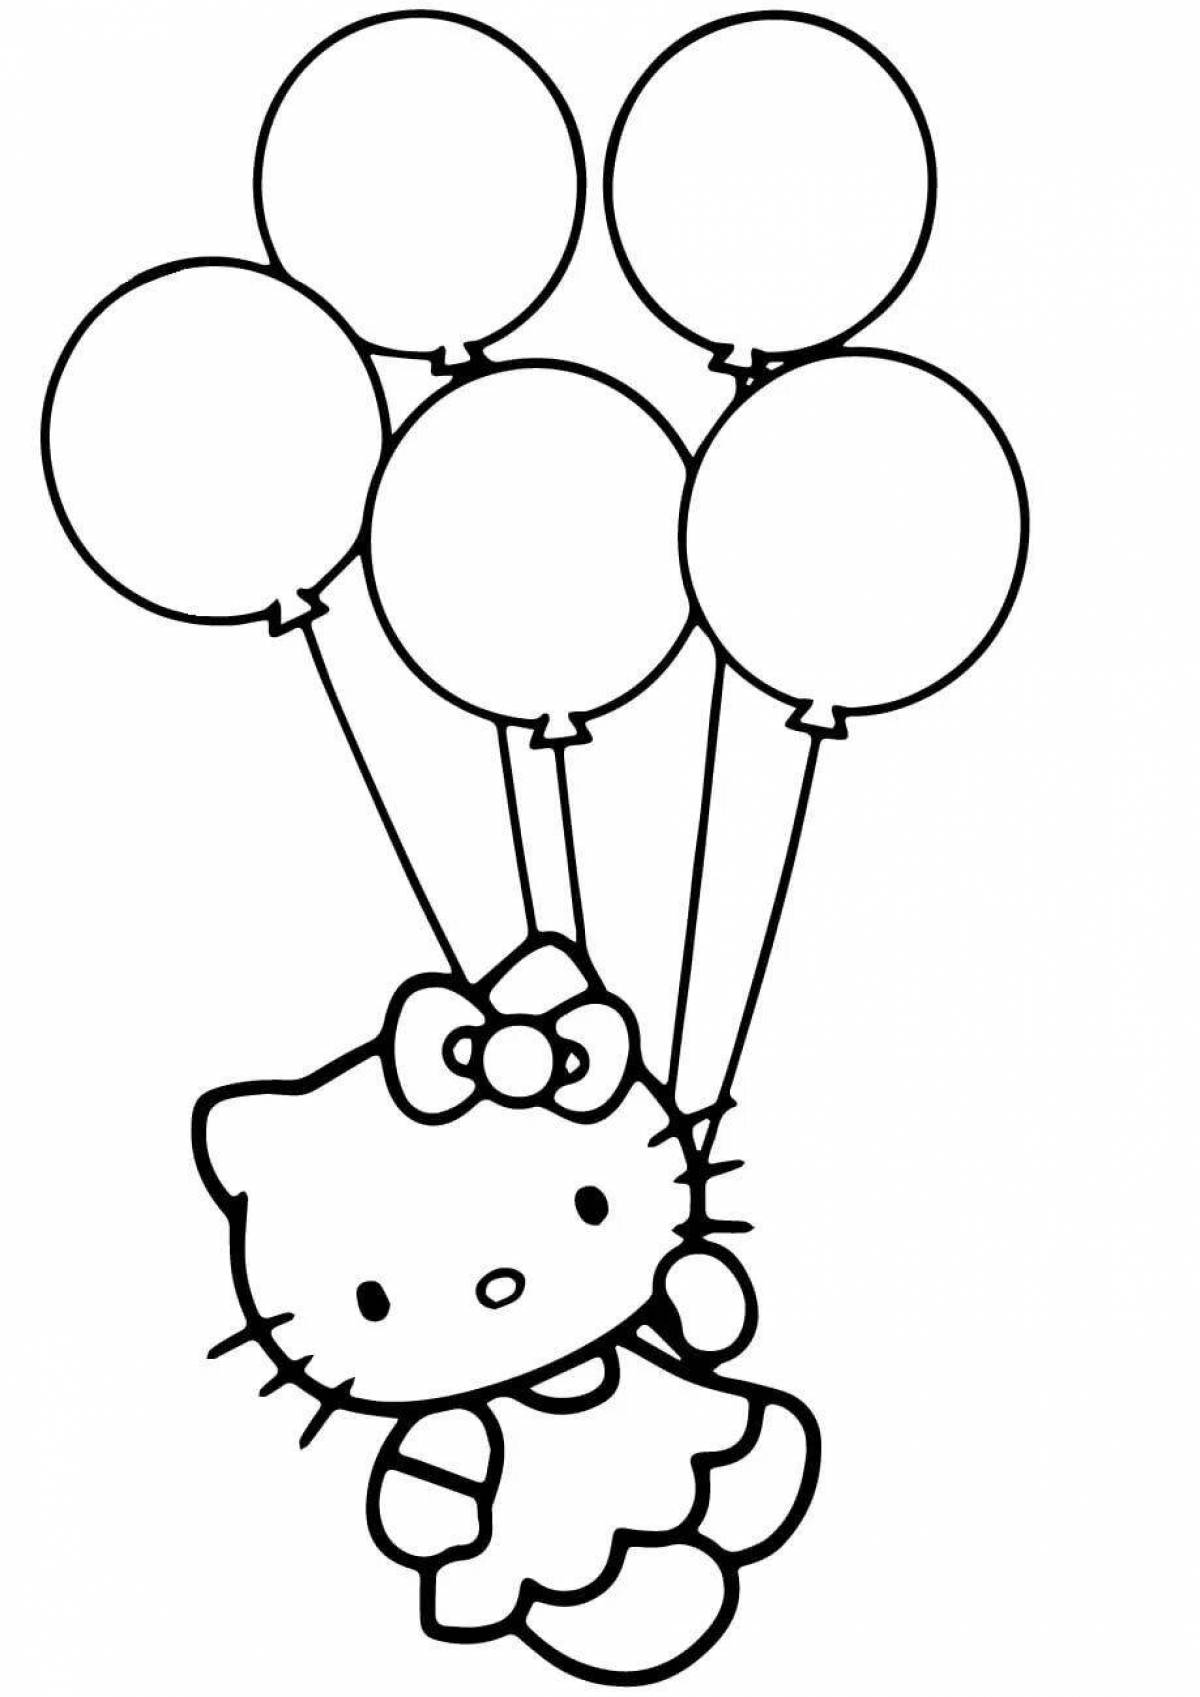 Coloring page dazzling happy birthday balloons